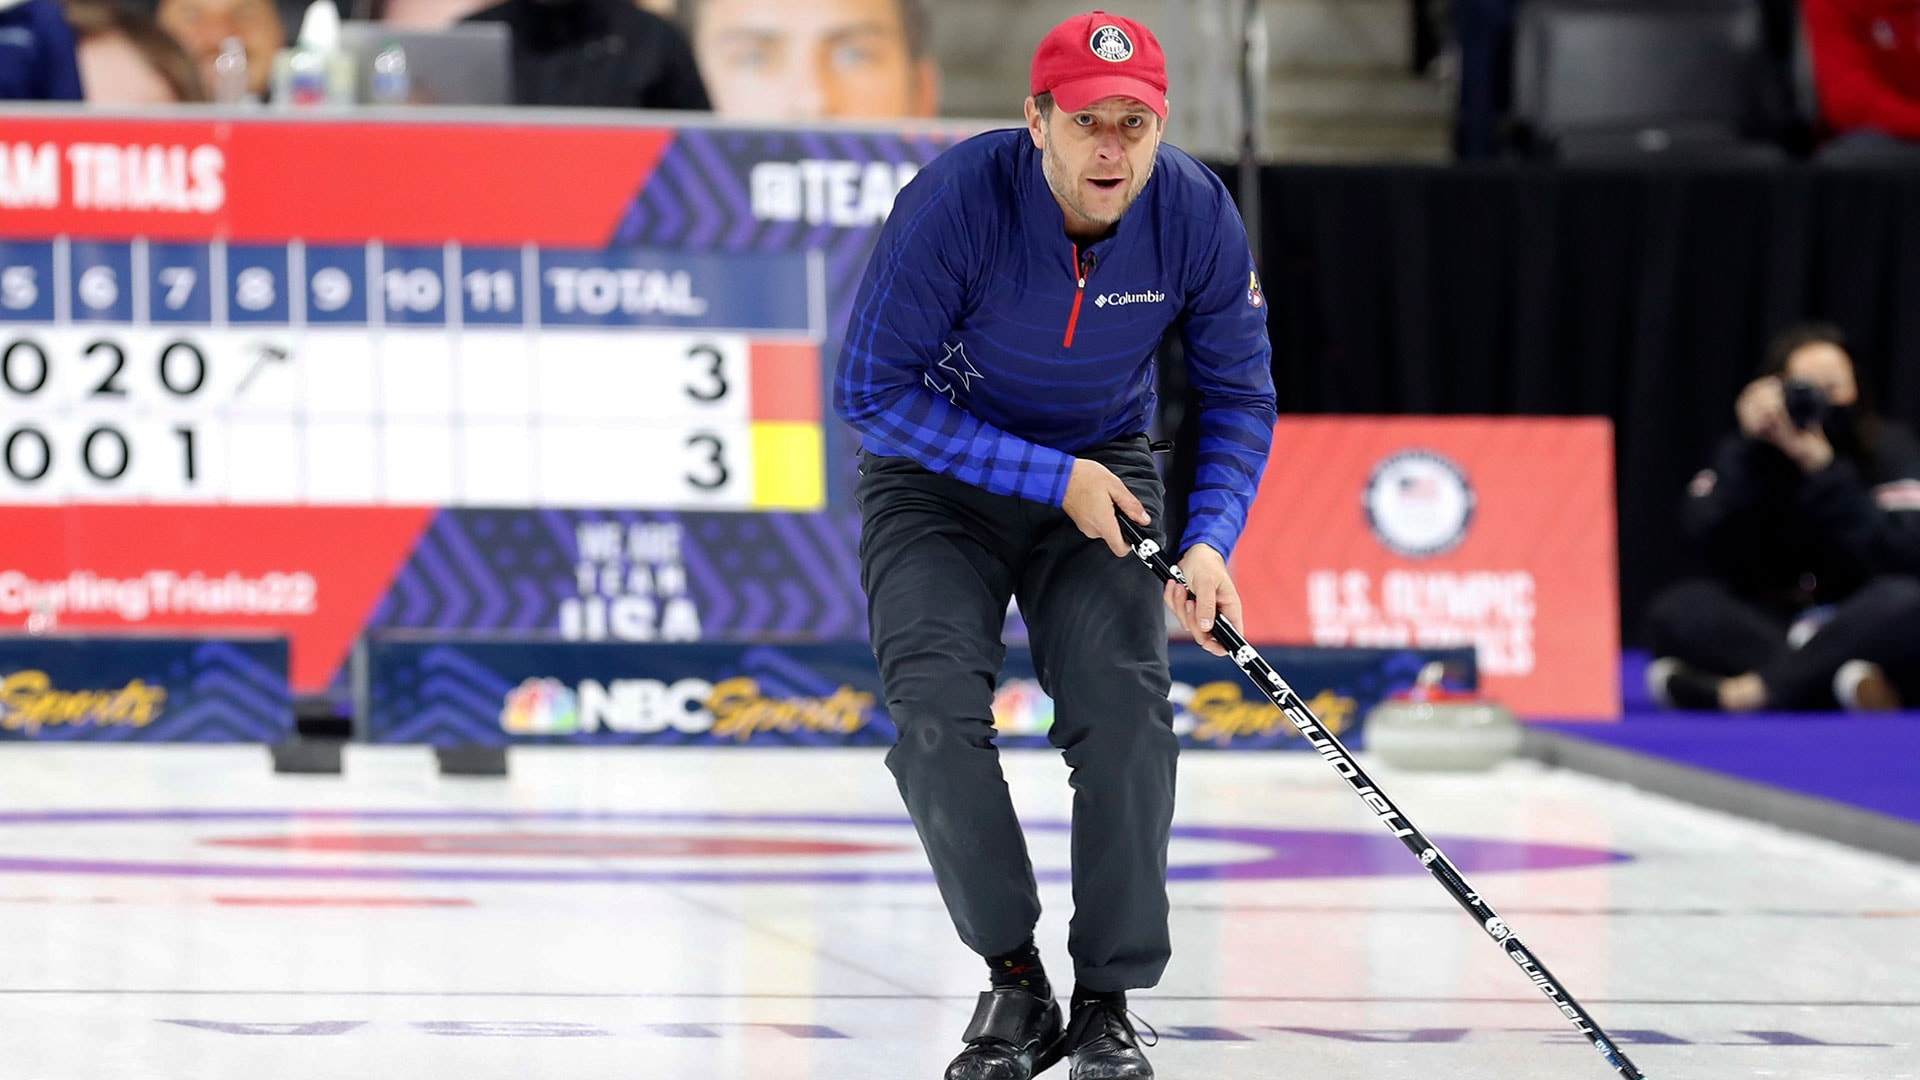 Podcast Looking back at Broomgate and John Shusters journey to historic curling gold